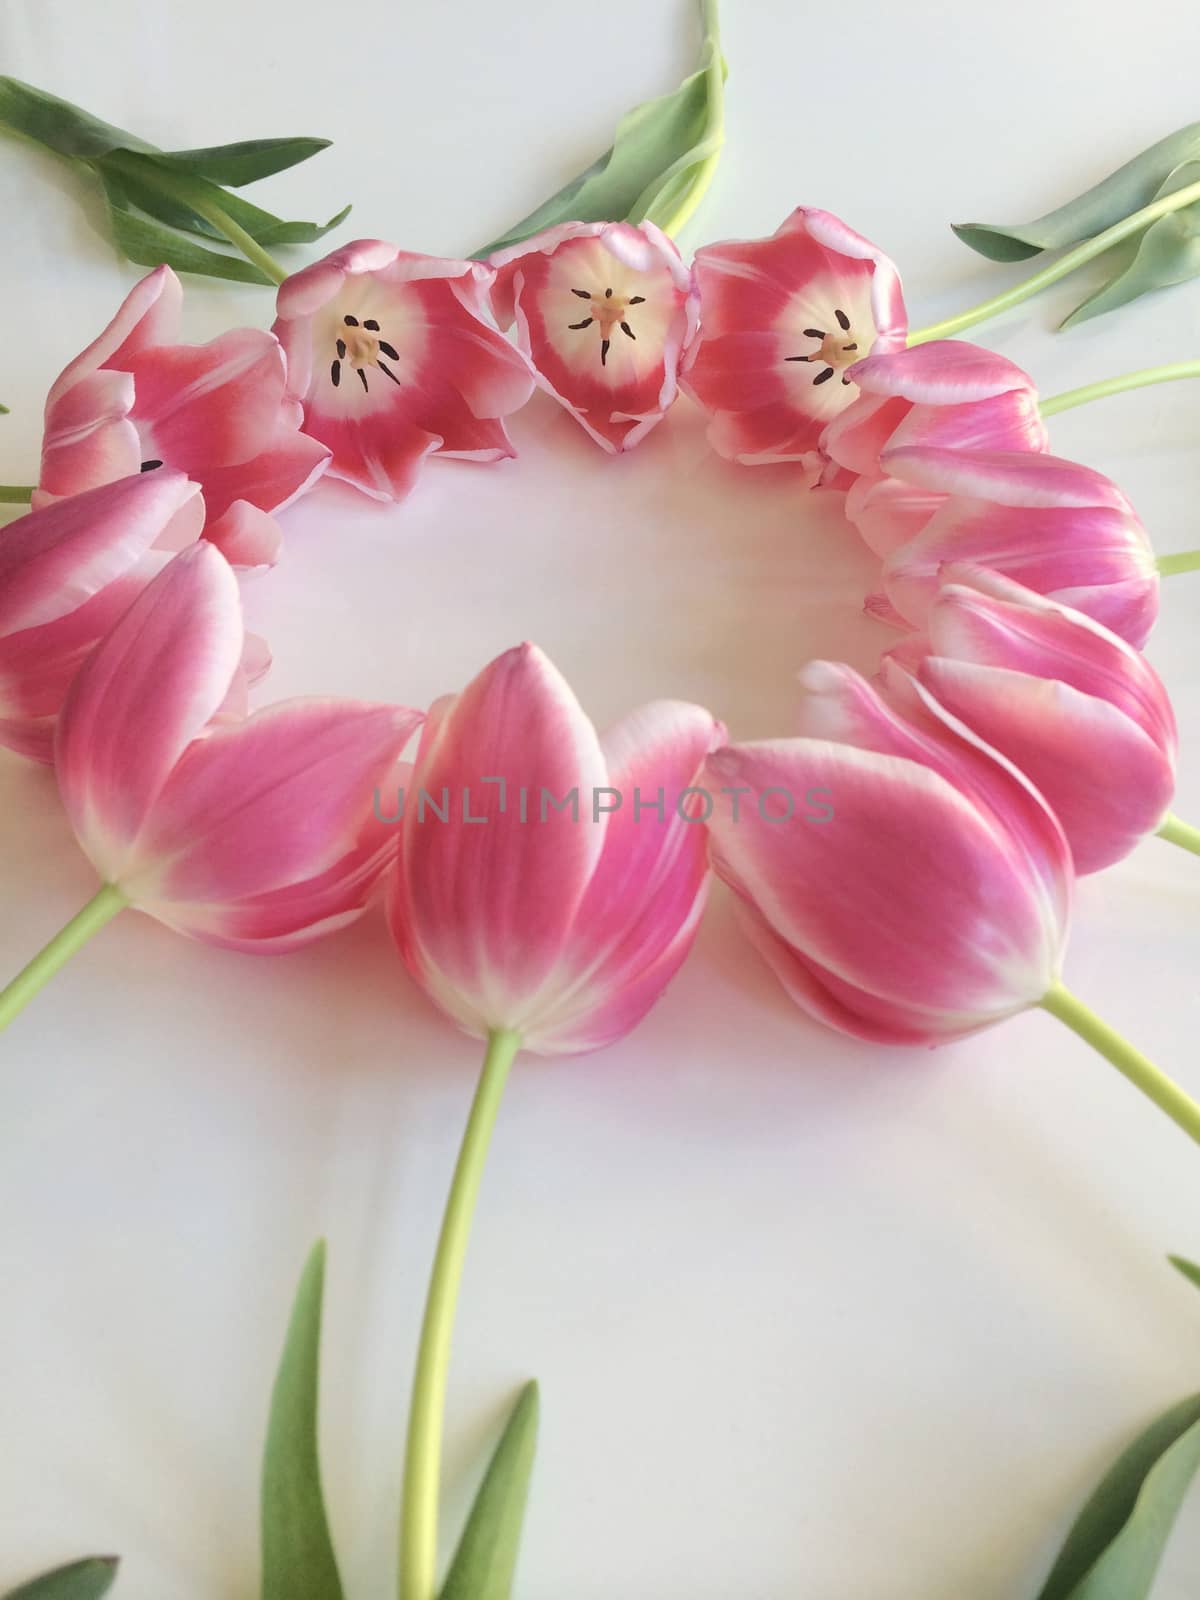 Arrangement of pink and white tulips